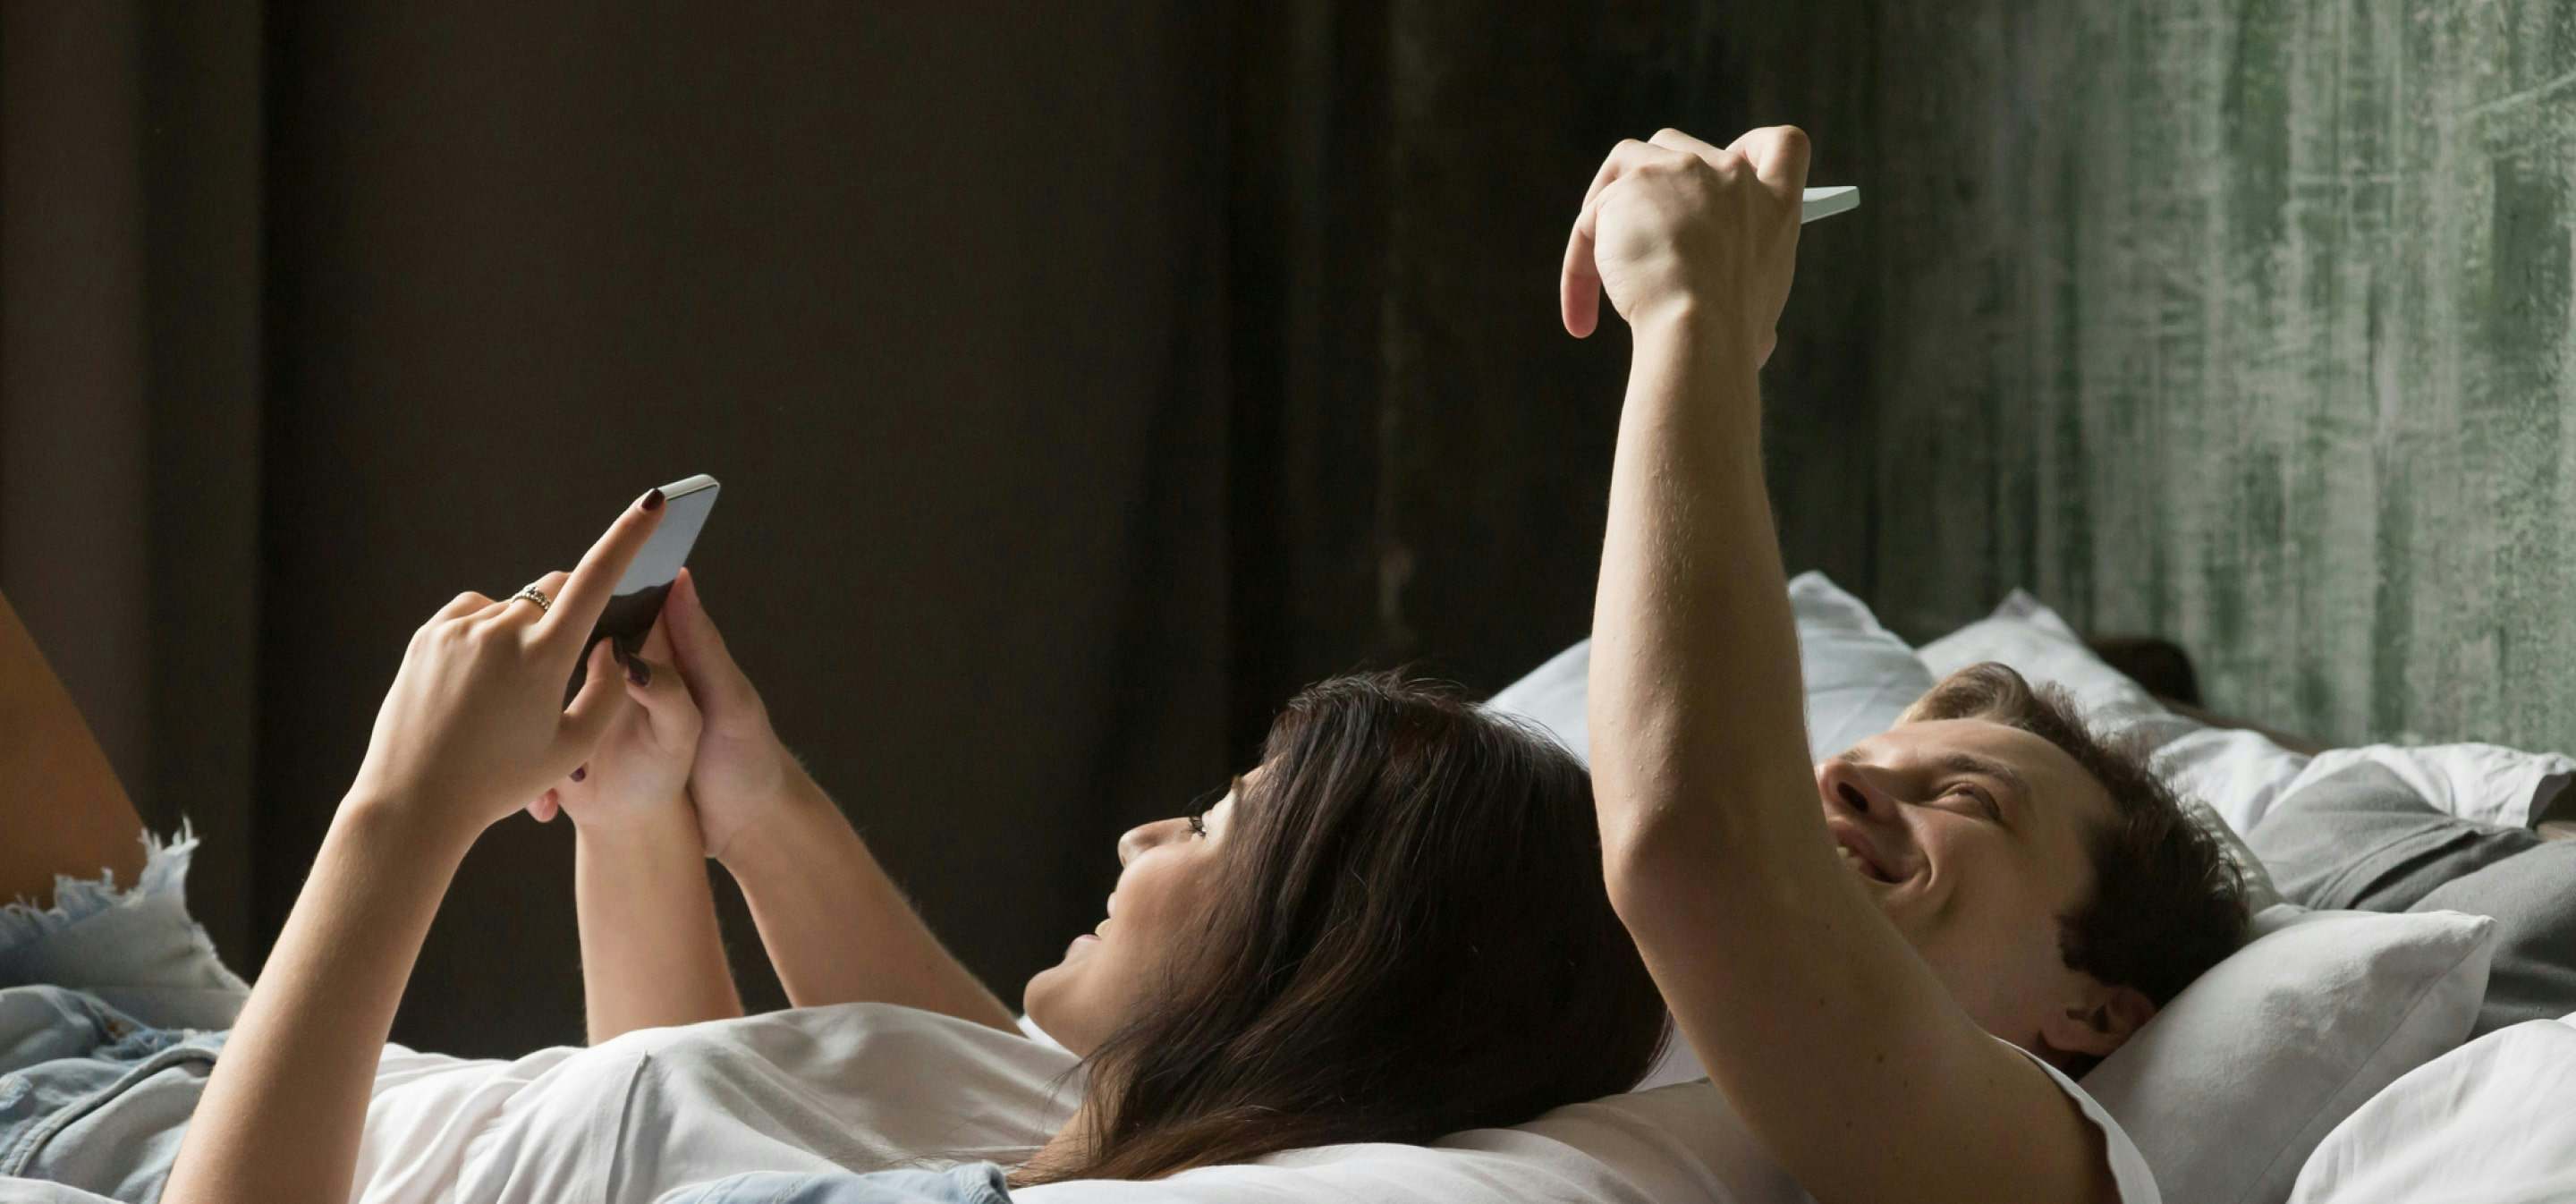 Couple on bed using phones